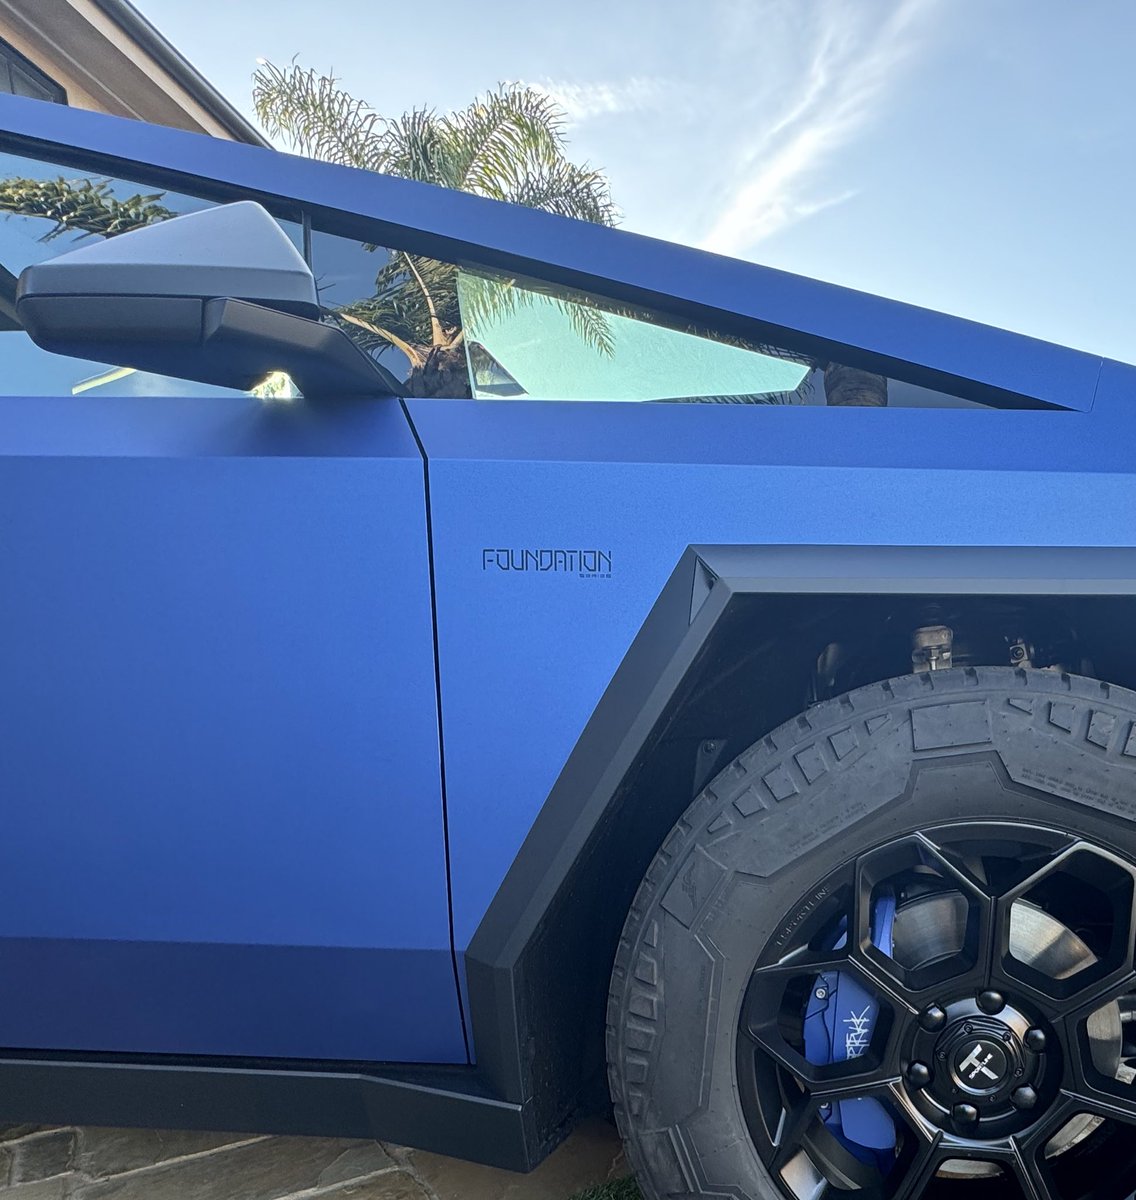 Foundation Series wrapped by @TSportline in 3M Matte Slate Blue Metalic vinyl with TSportline CT7 20” Tesla Cybertruck Fully Forged Lightweight Tesla Wheels and custom painted brake calipers to match.
.
#cybertruck #bluecybertruck #tesla #foundationseries #teslacybertruck